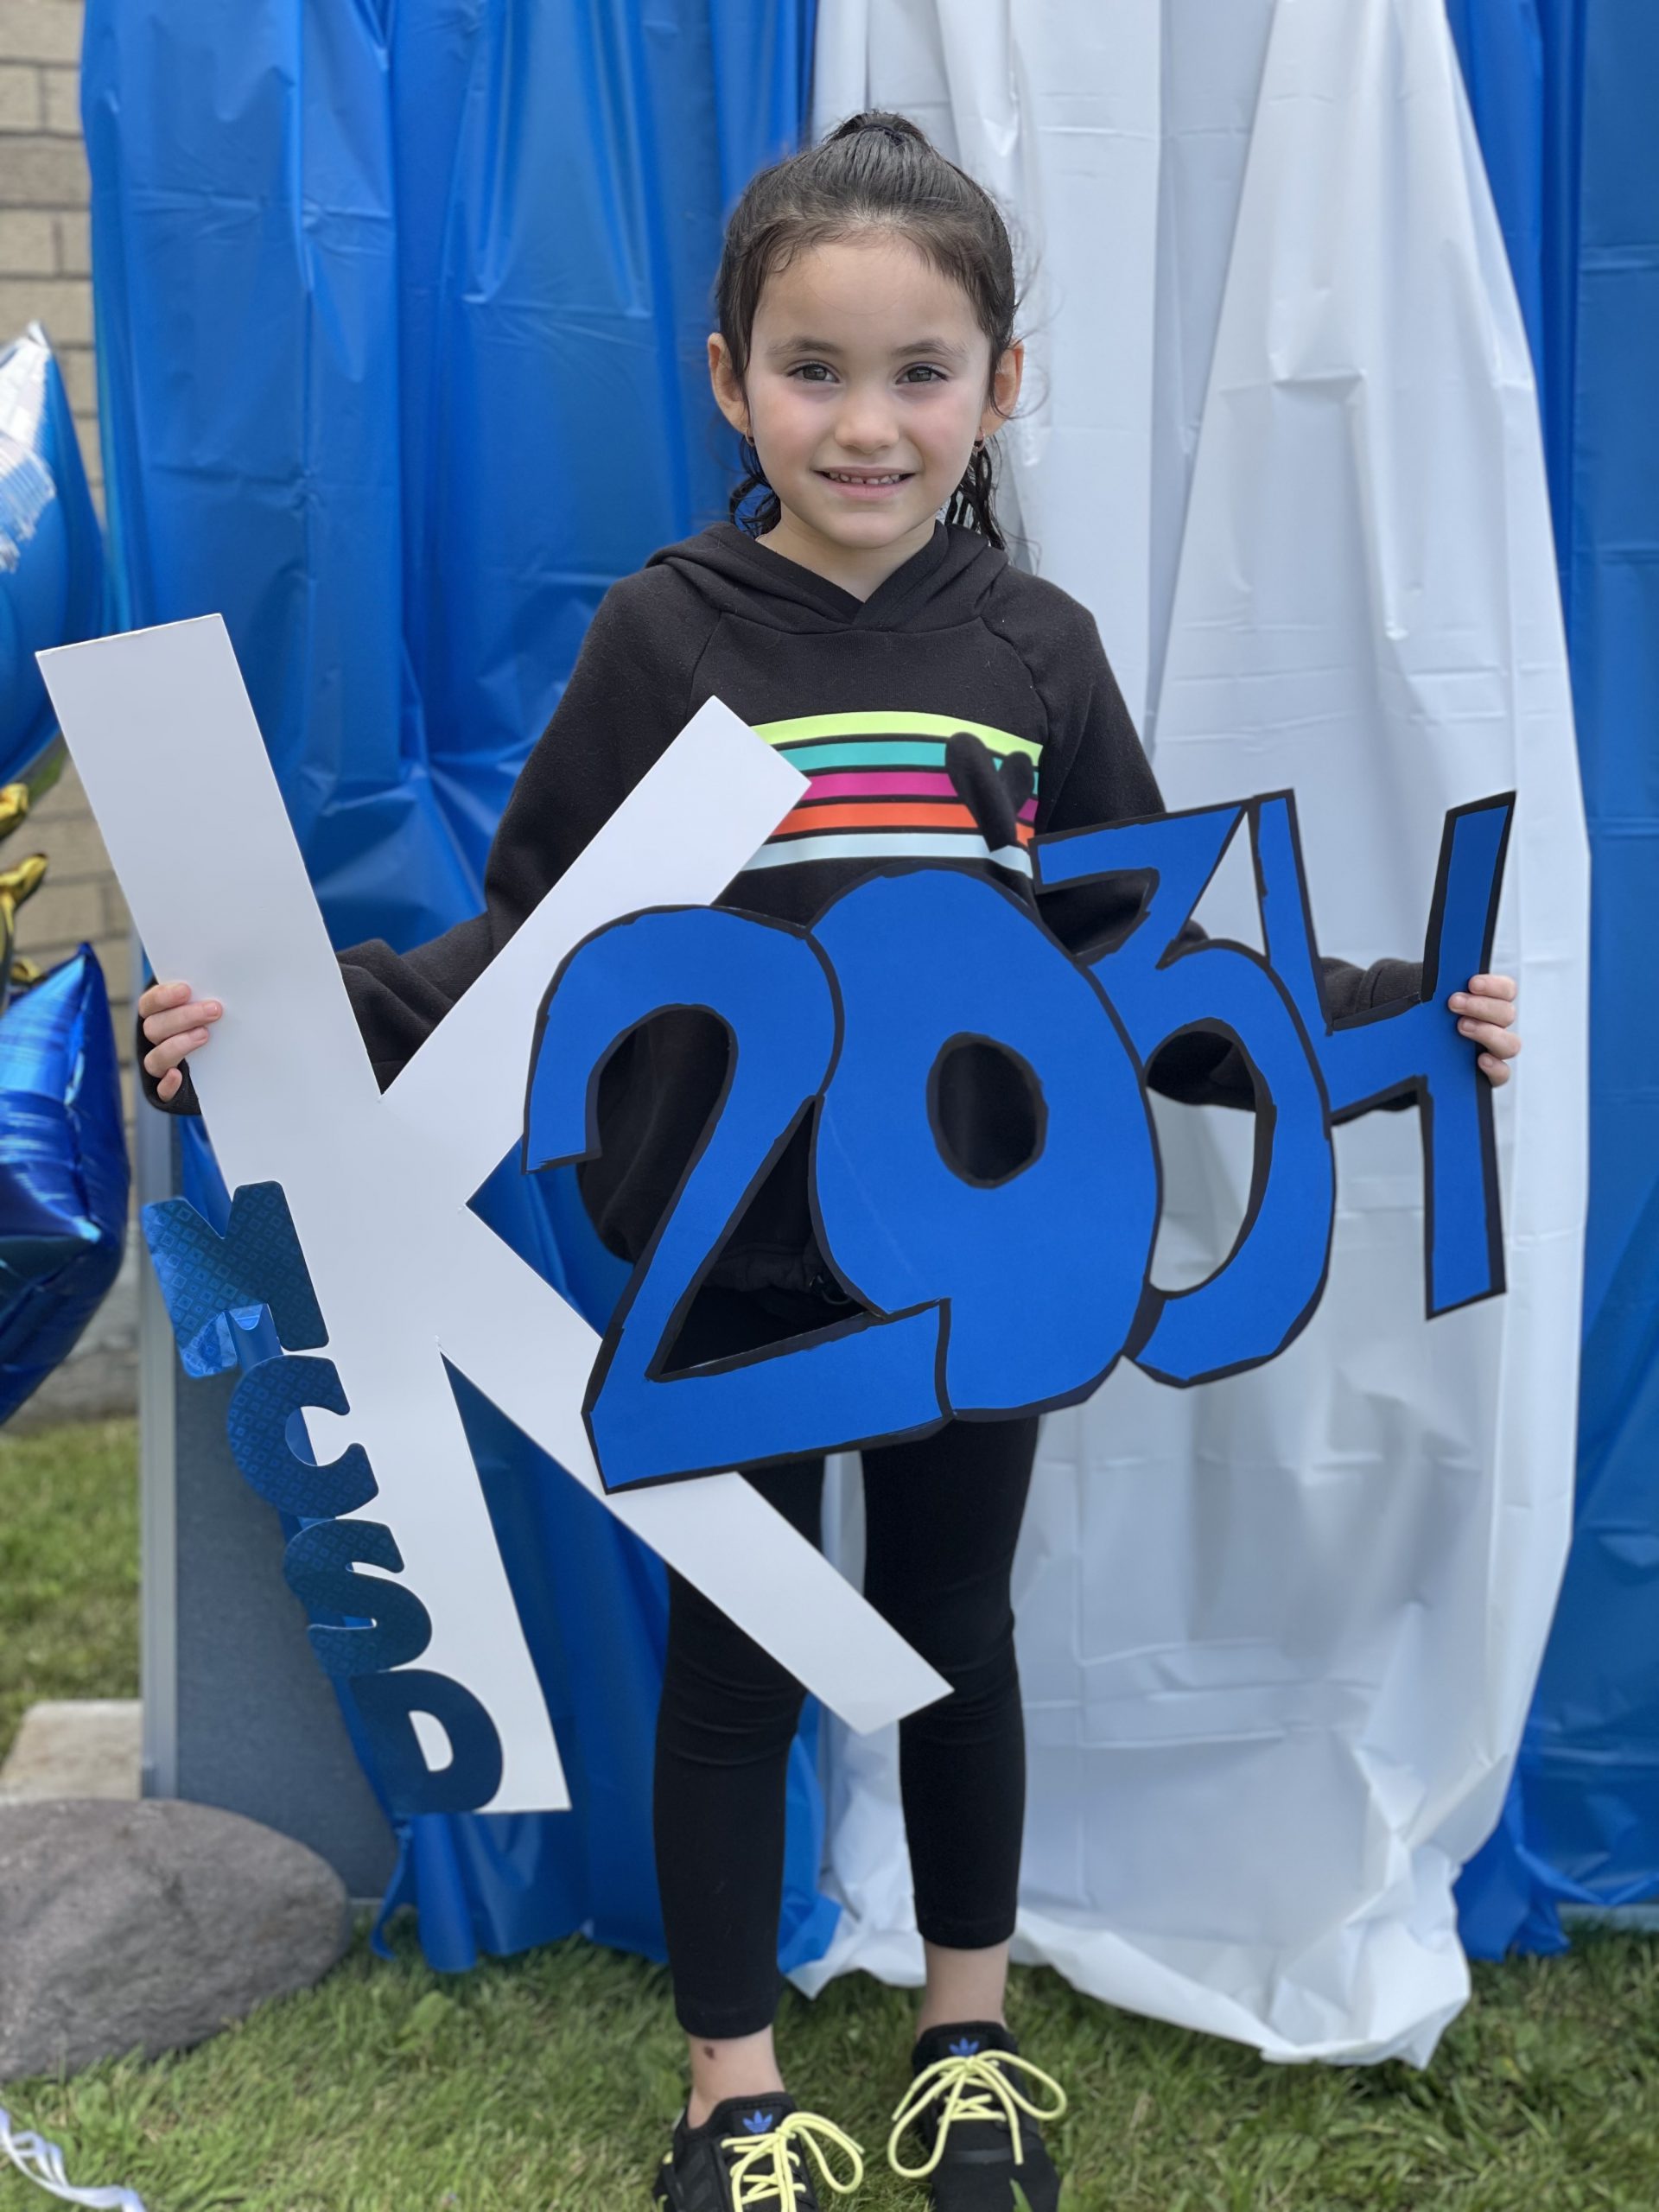 a young girl is holding up a sign that says class of 2034 